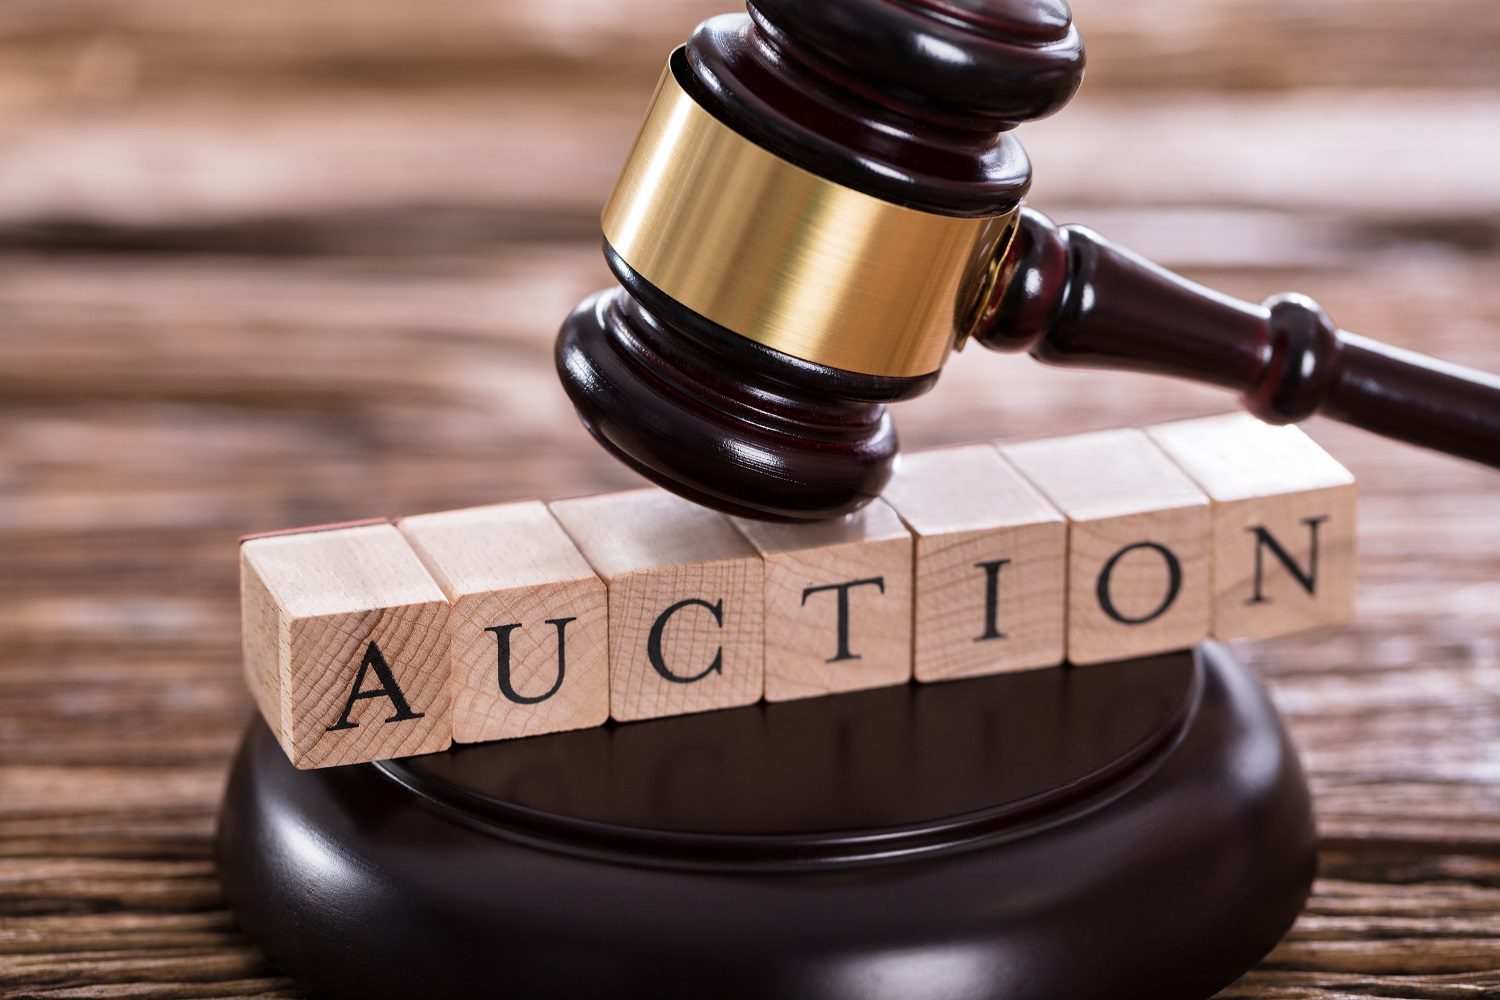 Enhancing property ownership in Nigeria through Auction - BuyLetLive